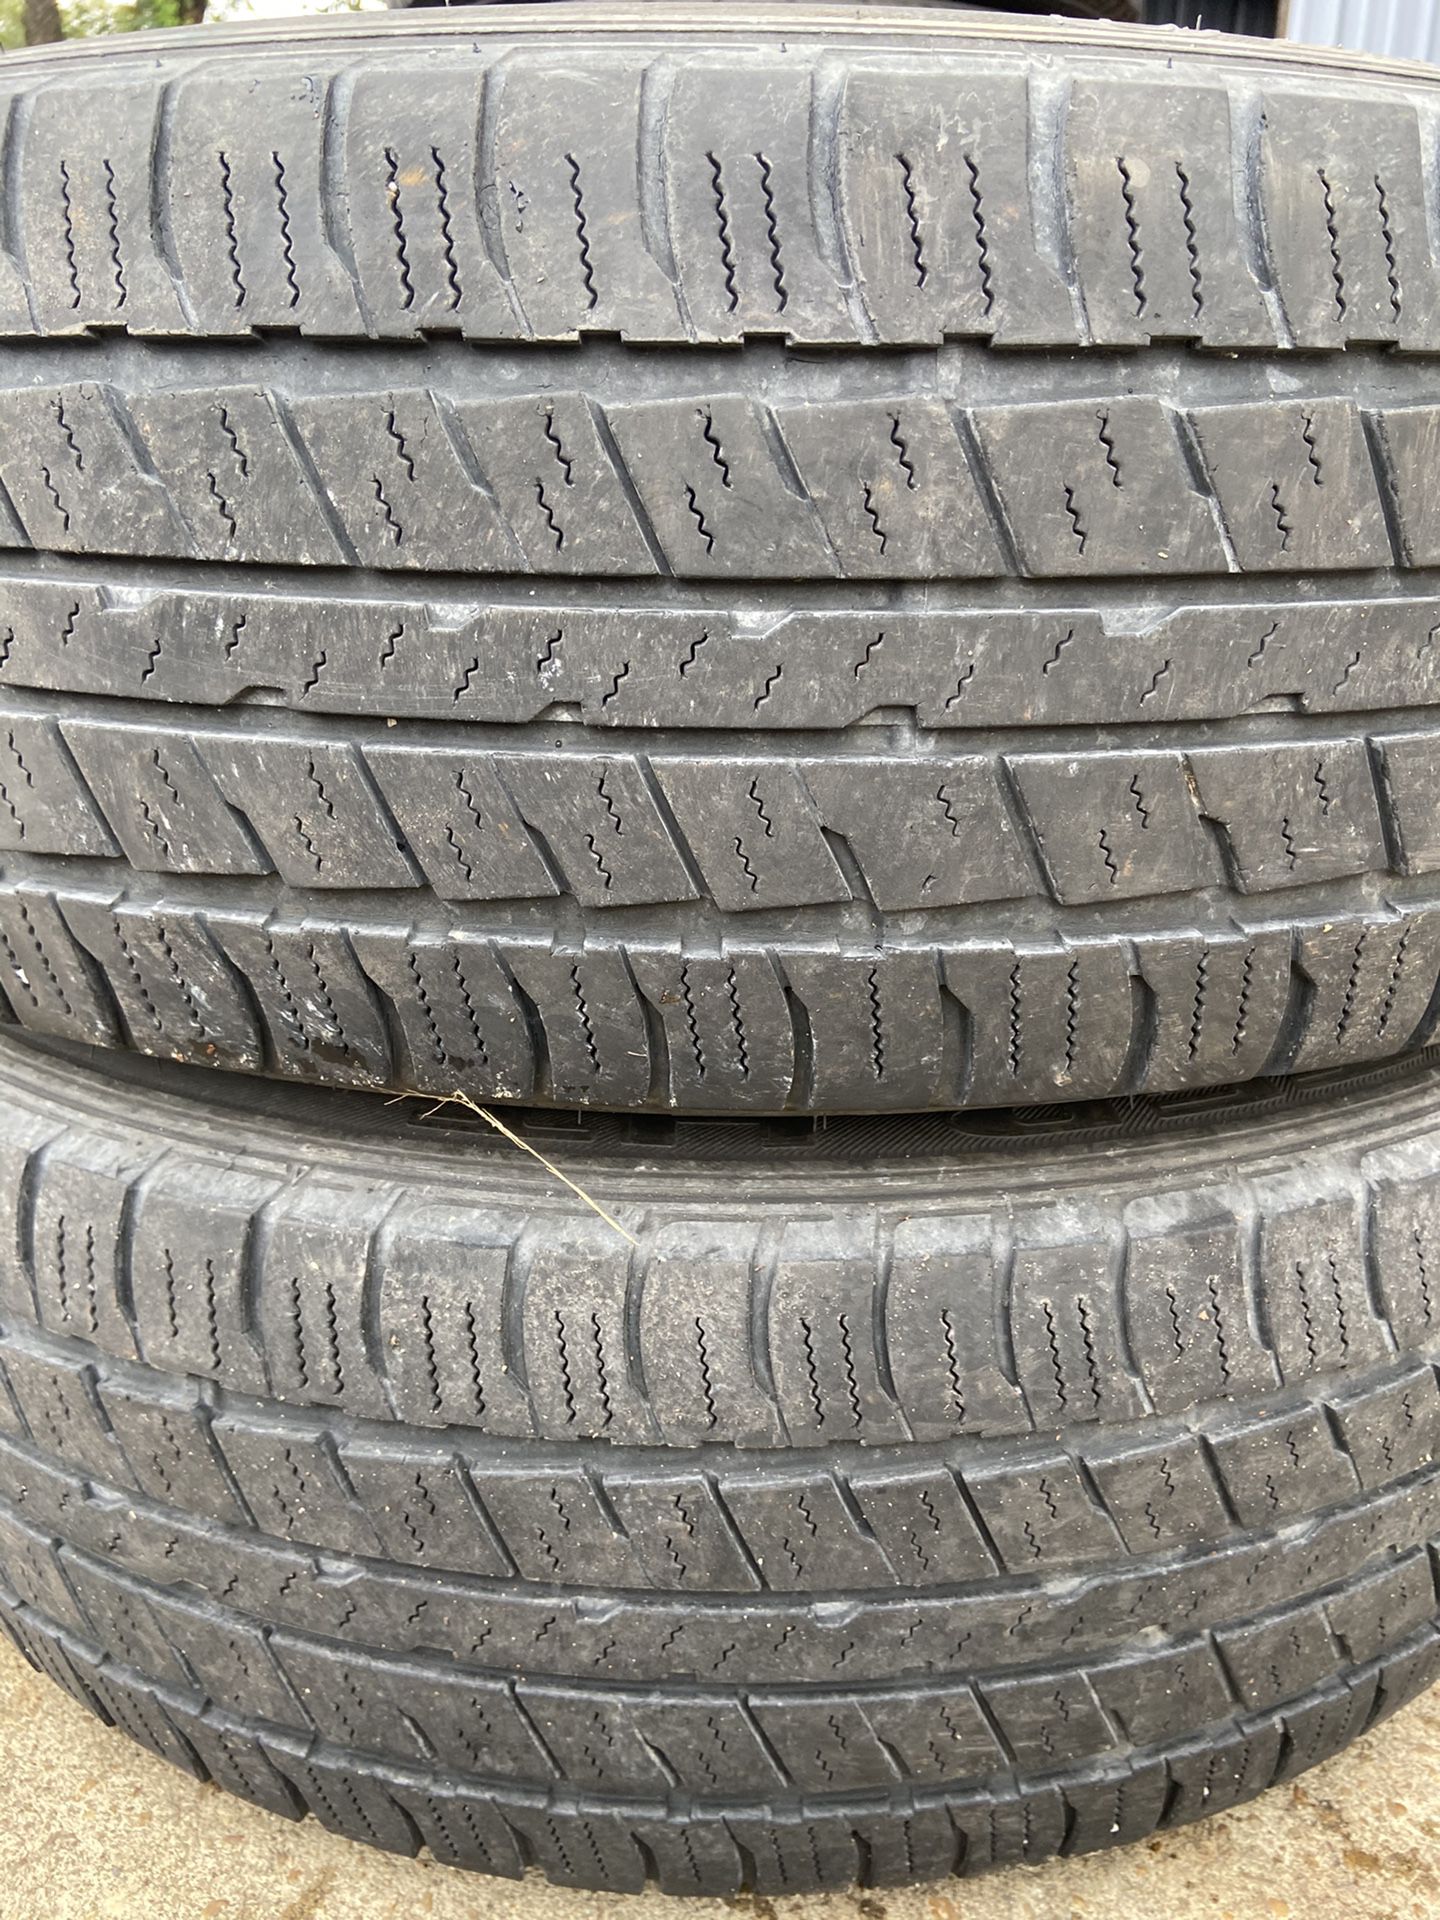 Two 235-60-R18 tires